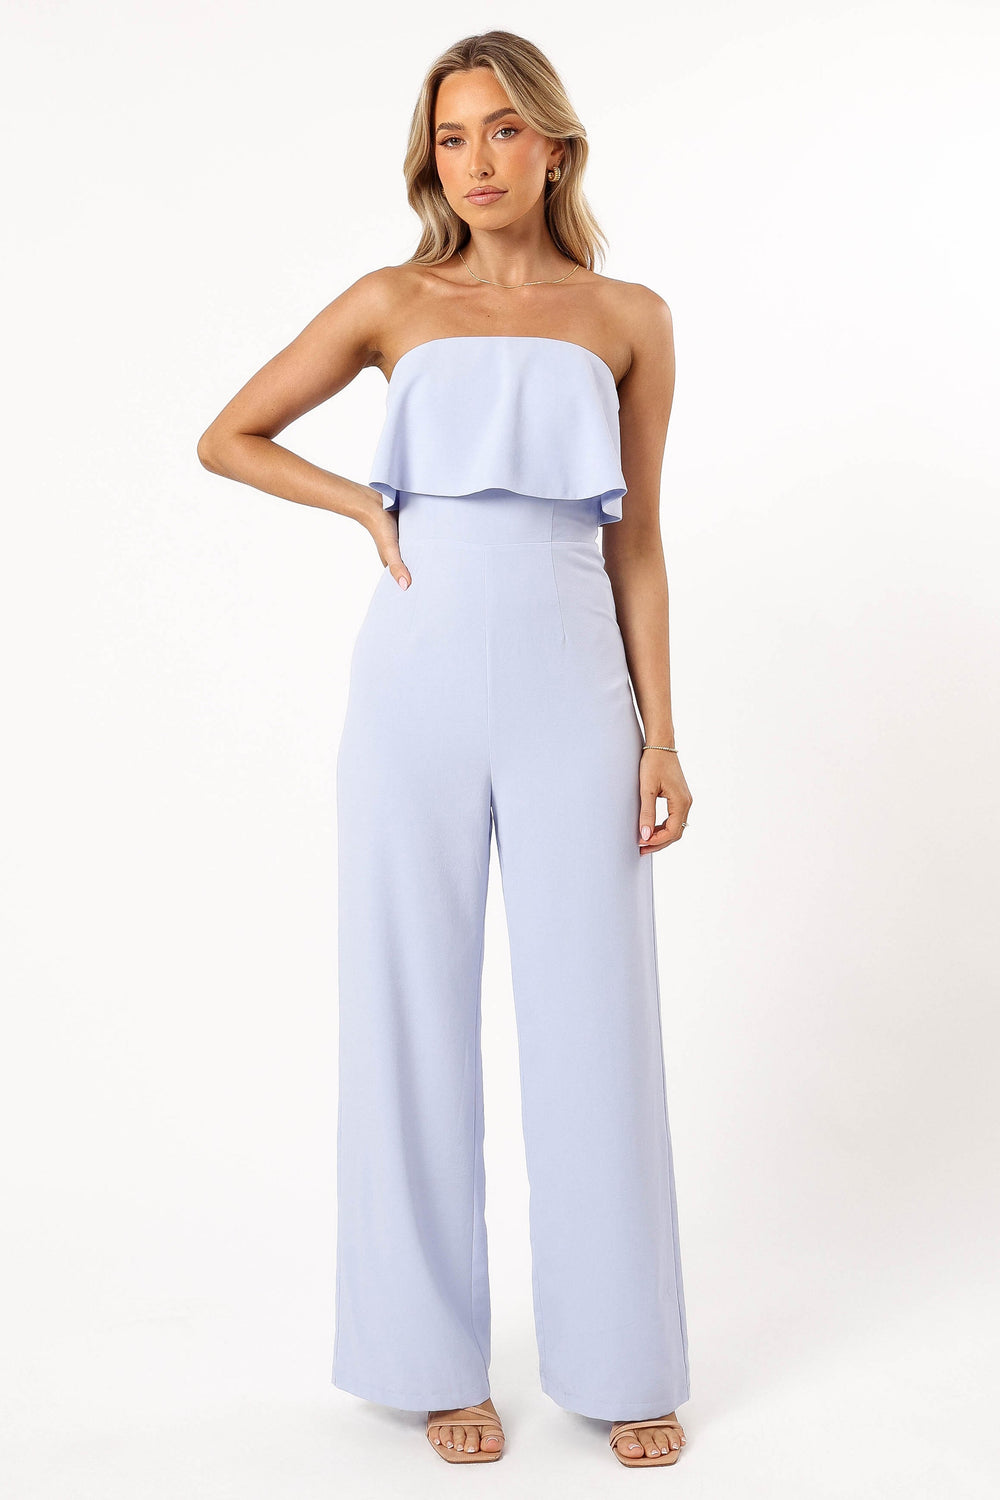 Petal and Pup USA Rompers Annabella Strapless Jumpsuit - Blue